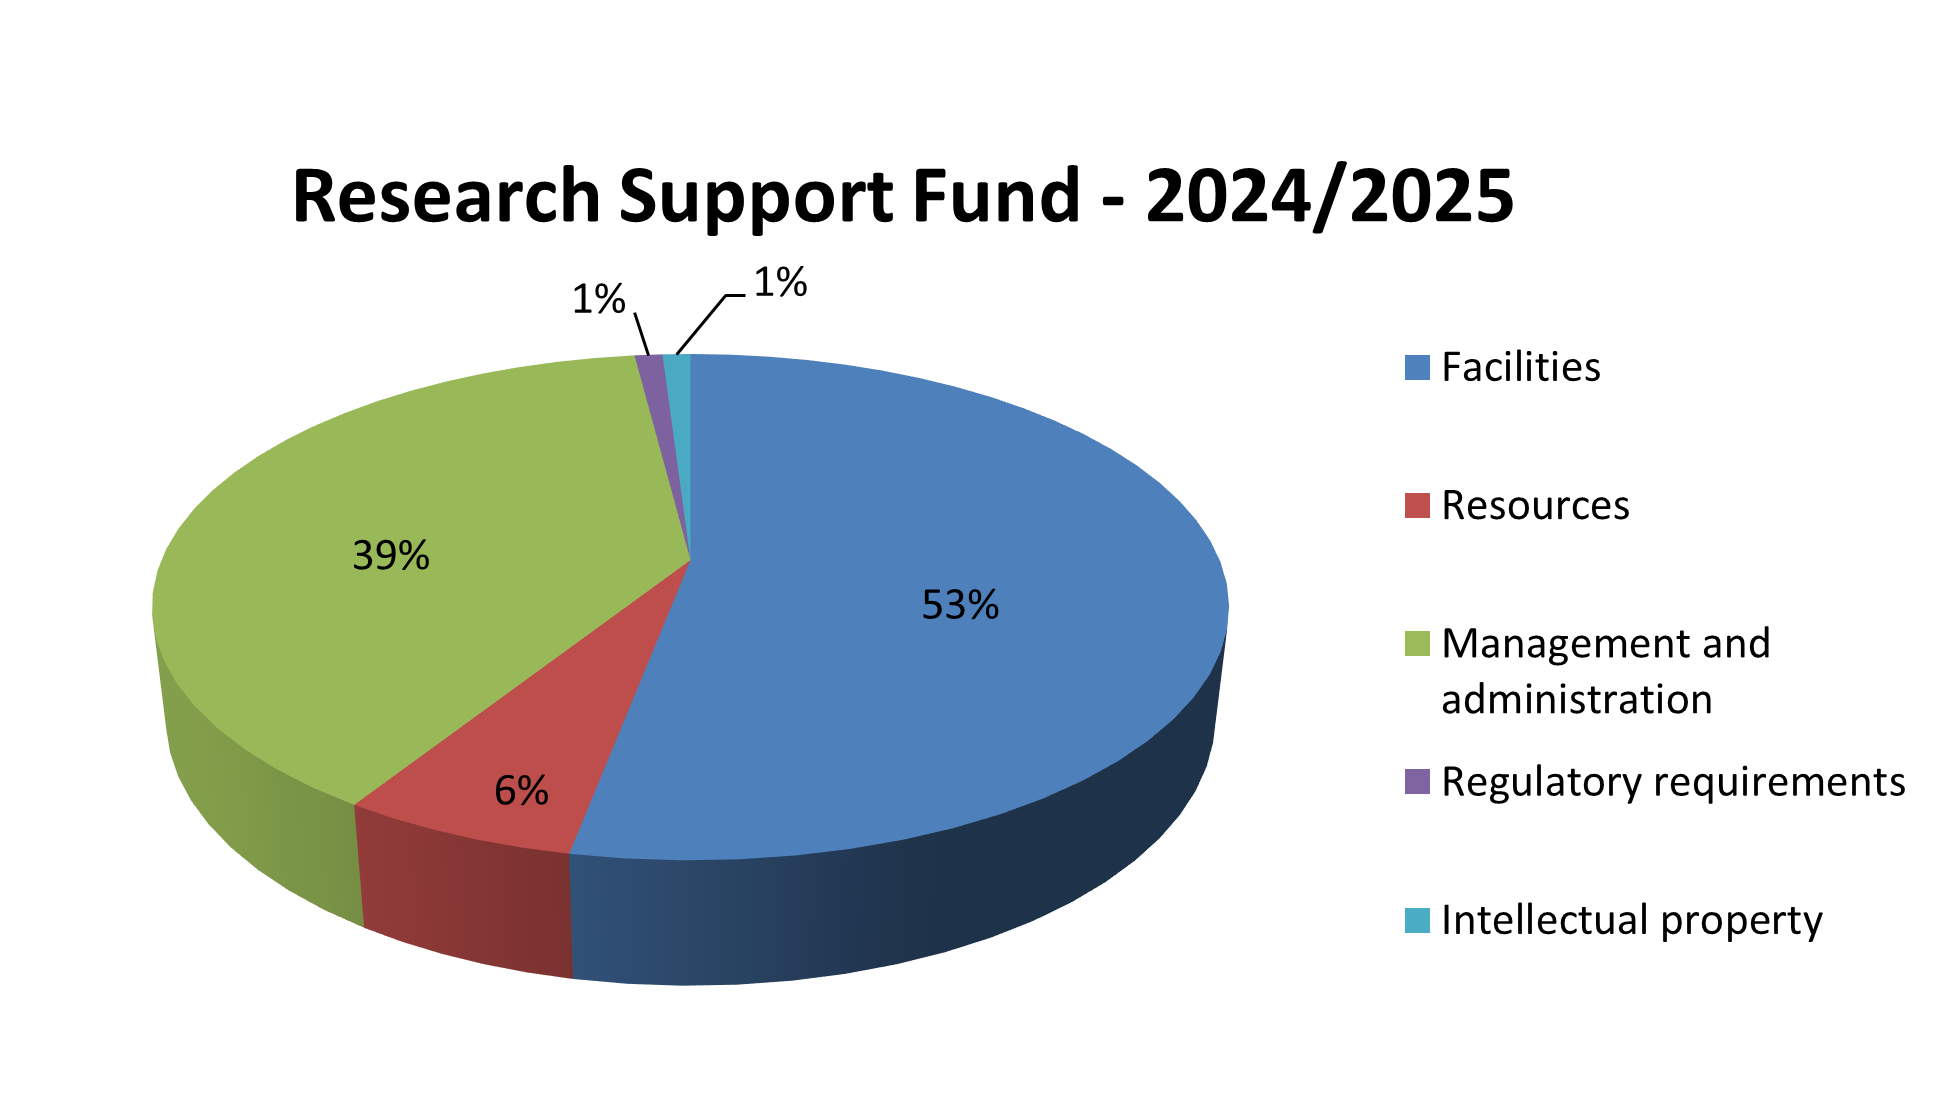 Pie chart depicting 2024/25 Research Support Fund allocation